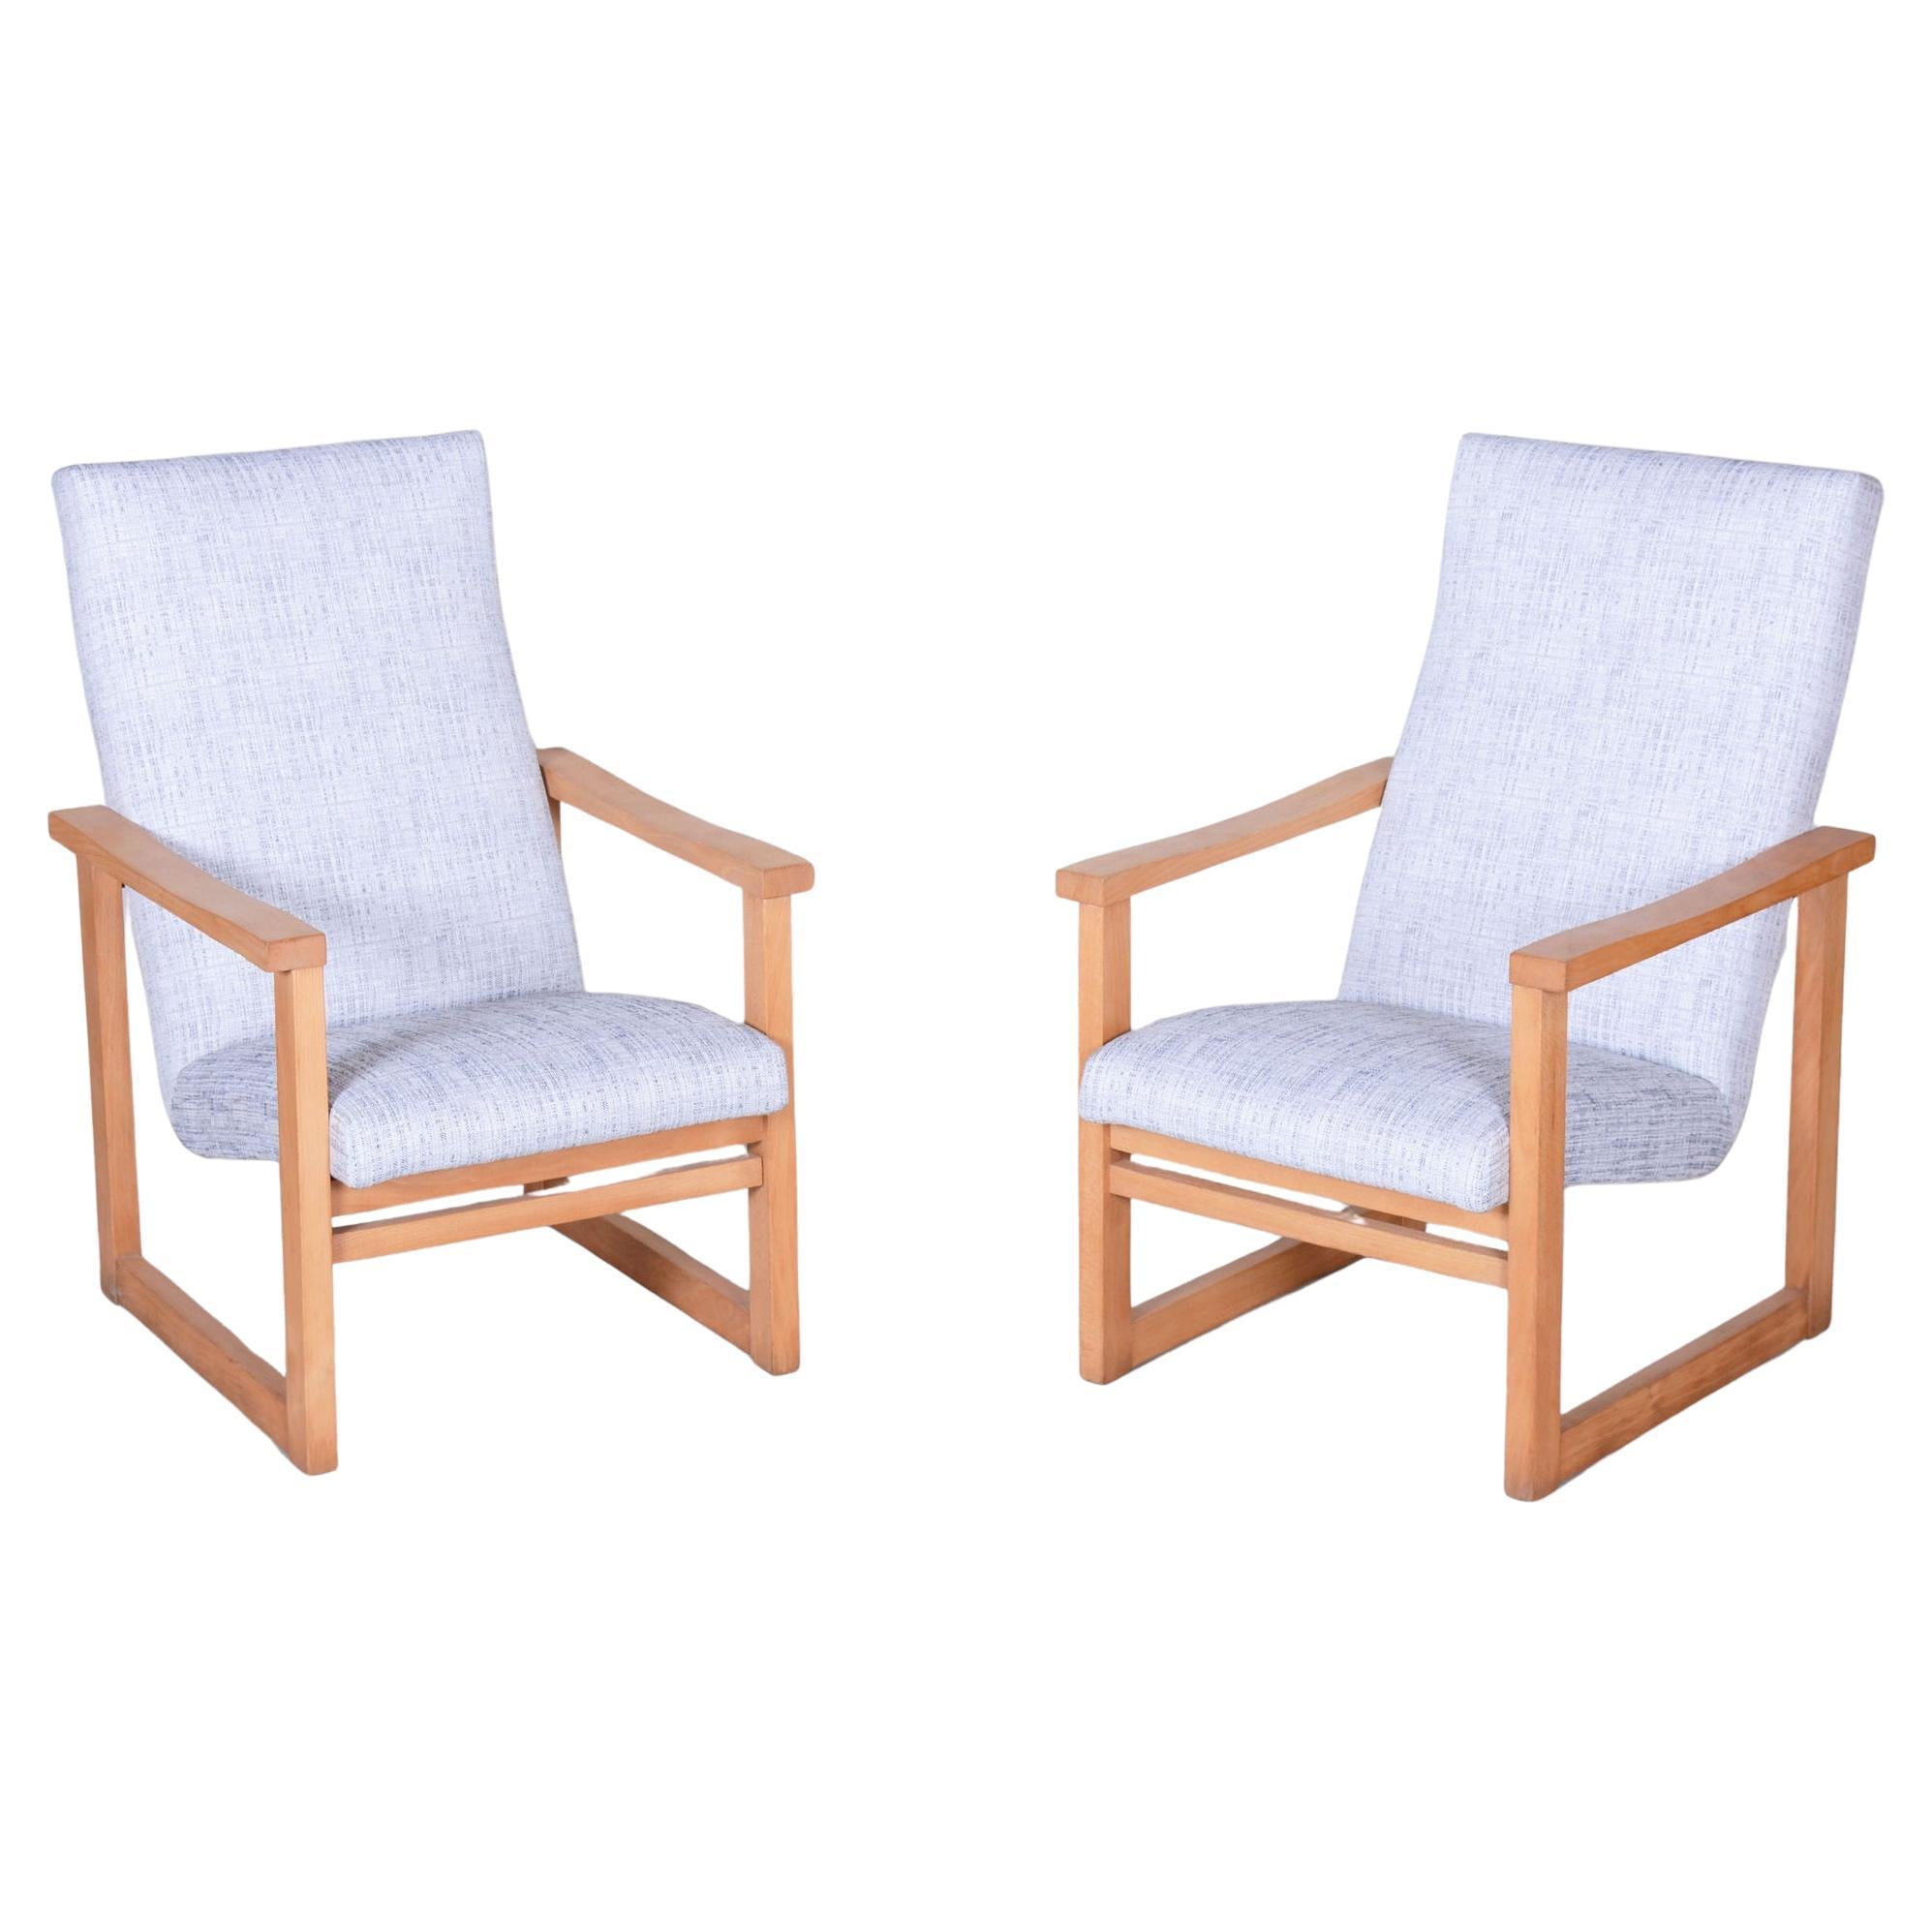 Pair of Restored Mid-Century Armchairs, Beech, New Upholstery, Czech, 1960s For Sale